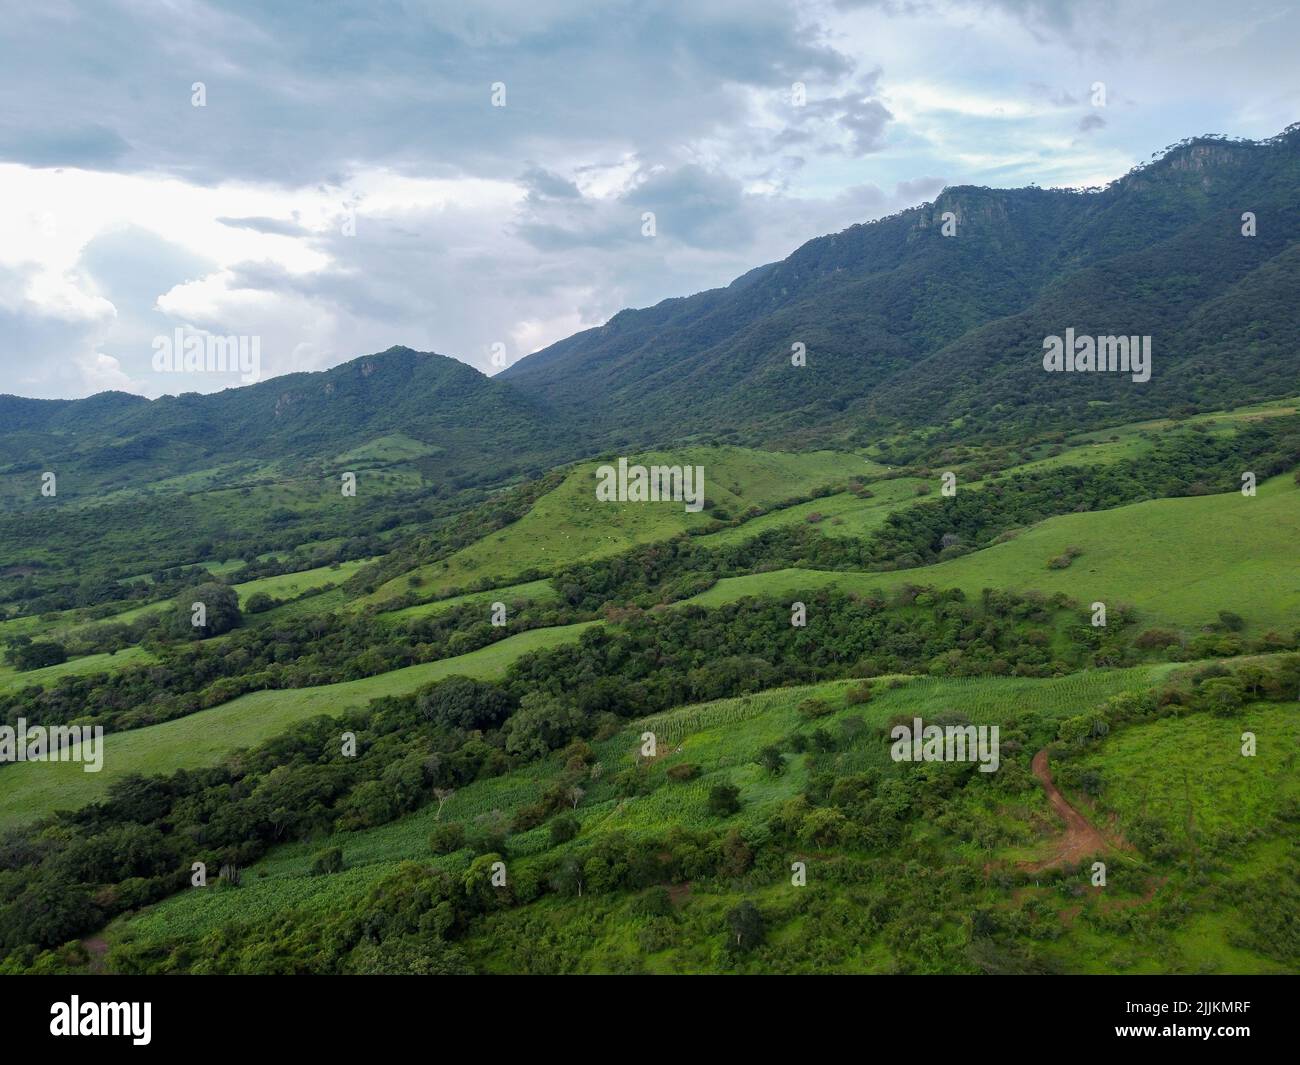 A drone view of a green landscape full of trees in the background of mountains. Stock Photo